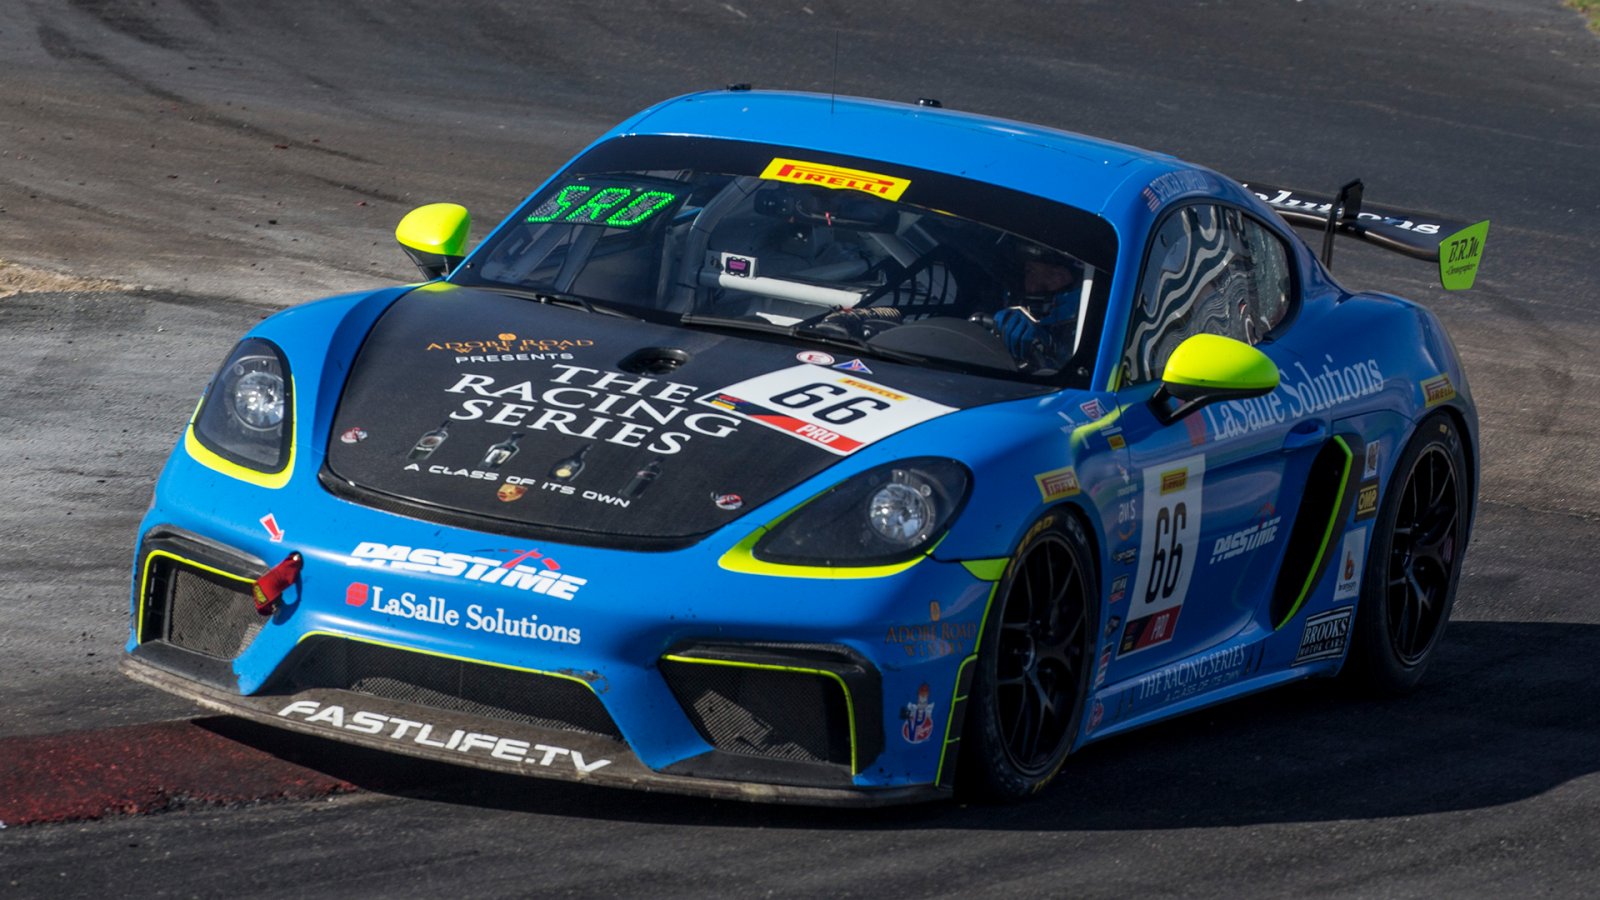 Pumpelly Nabs Pole for Pirelli GT4 America Sprint Race 1 at Las Vegas Motor Speedway